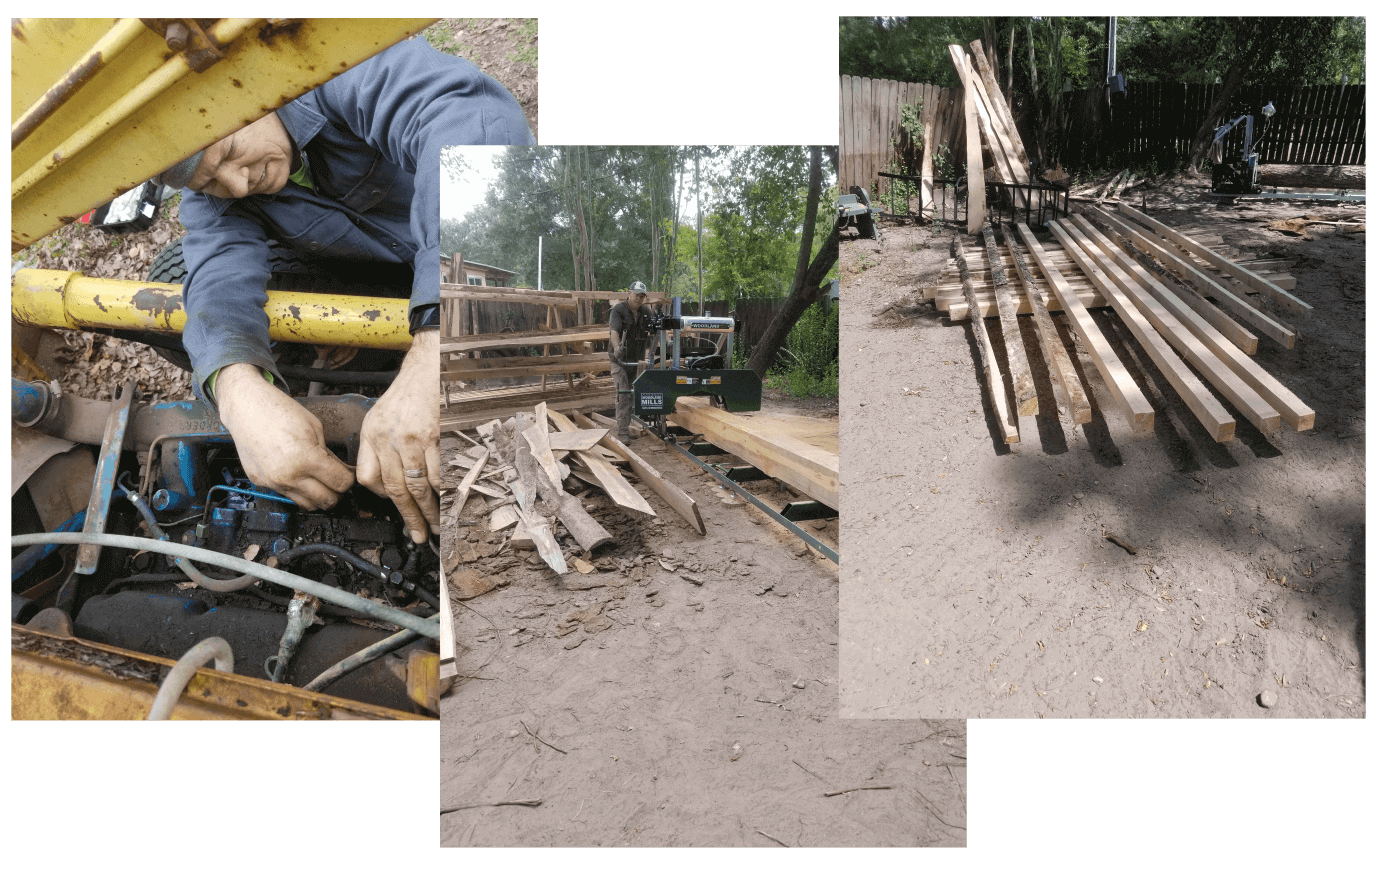 Tractor Repair and Sawmill Pictures